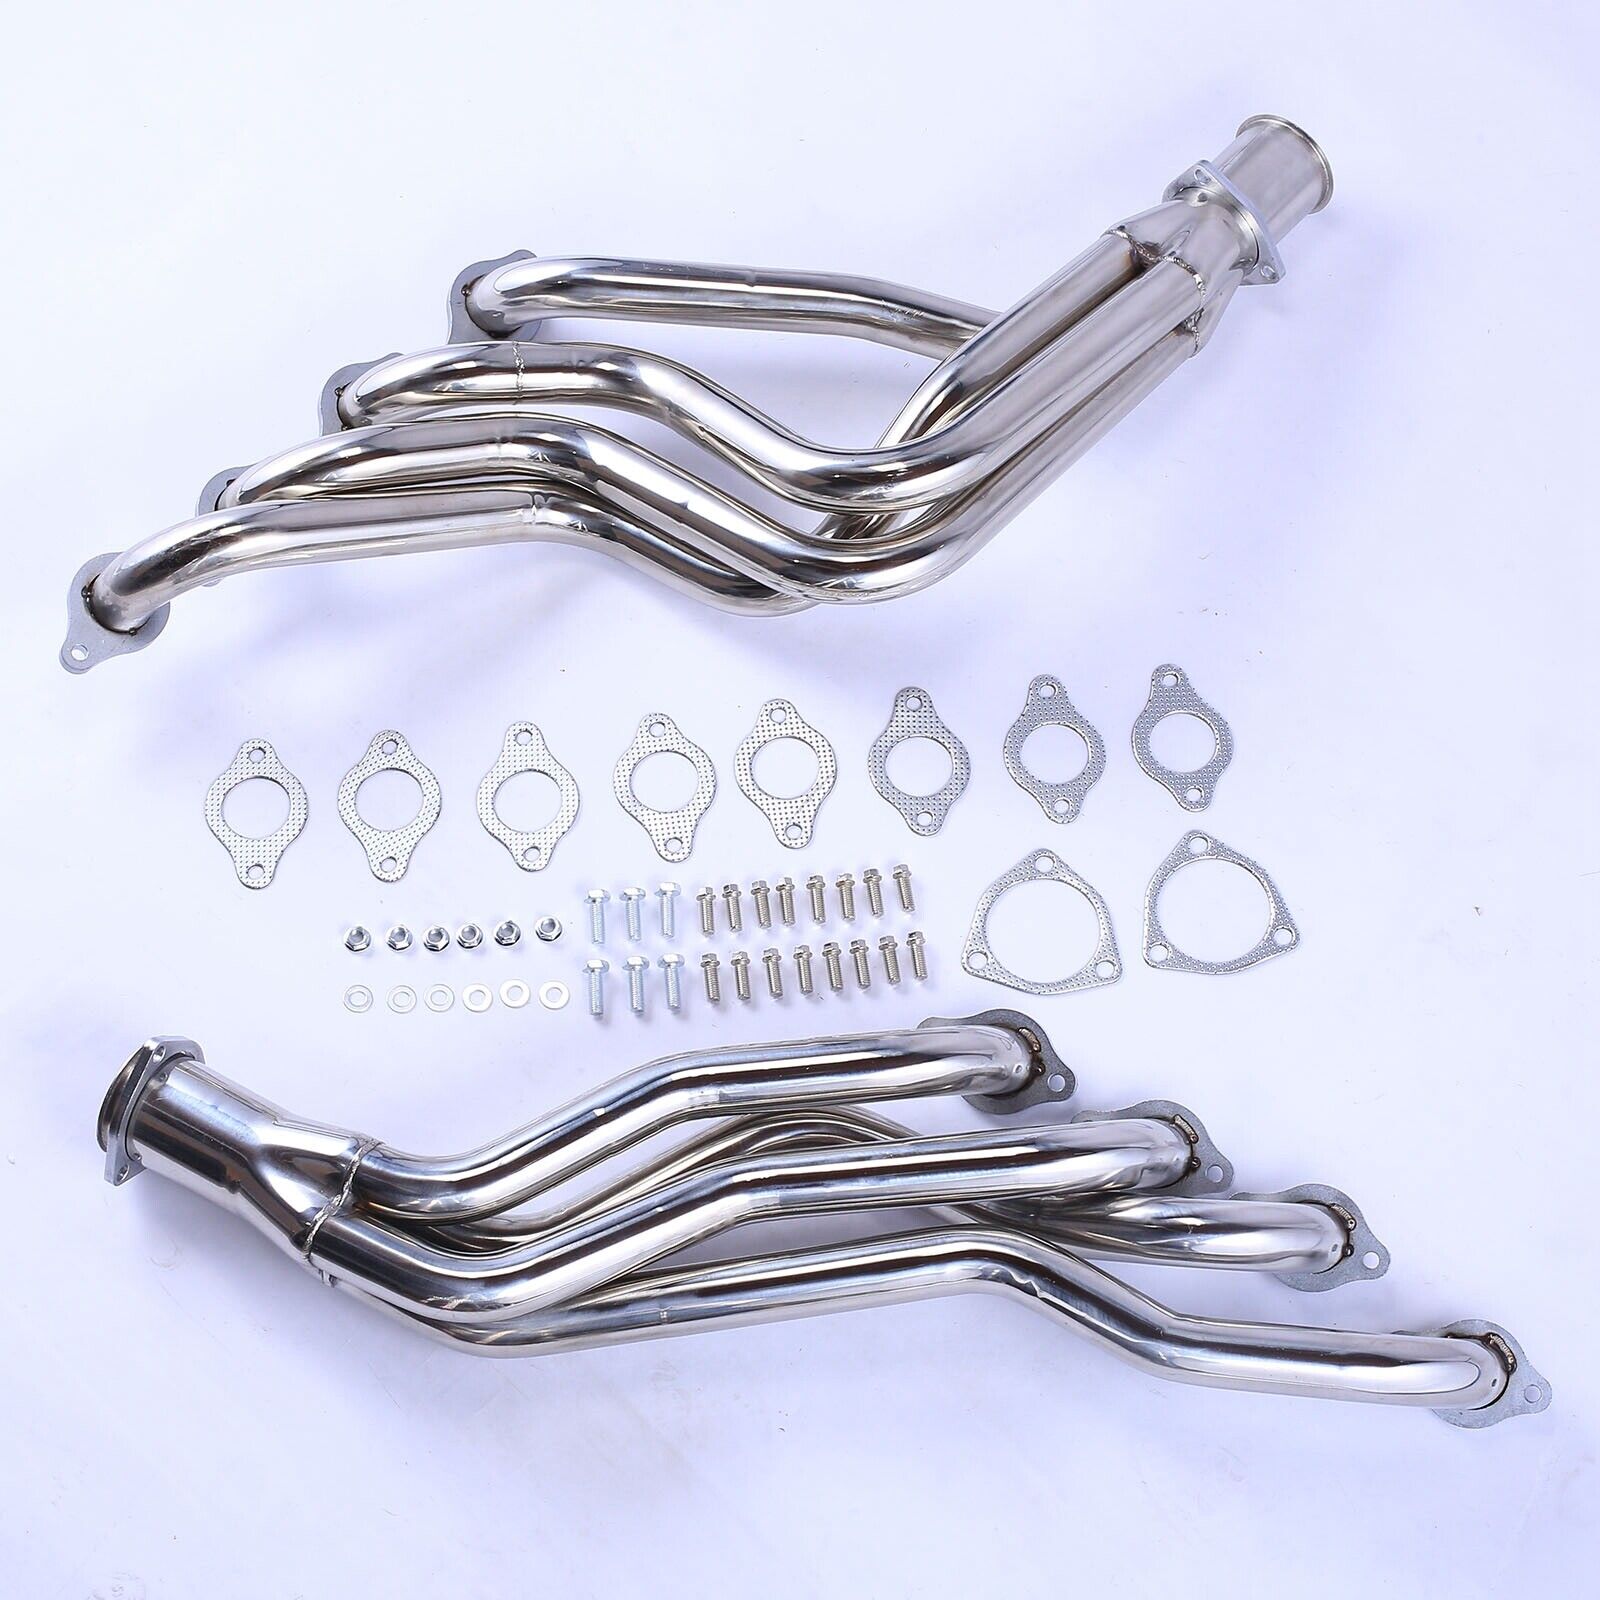 Stainless Steel Headers Exhaust Fits 68-72 BBC Chevy 396 427 Chevelle Camaro